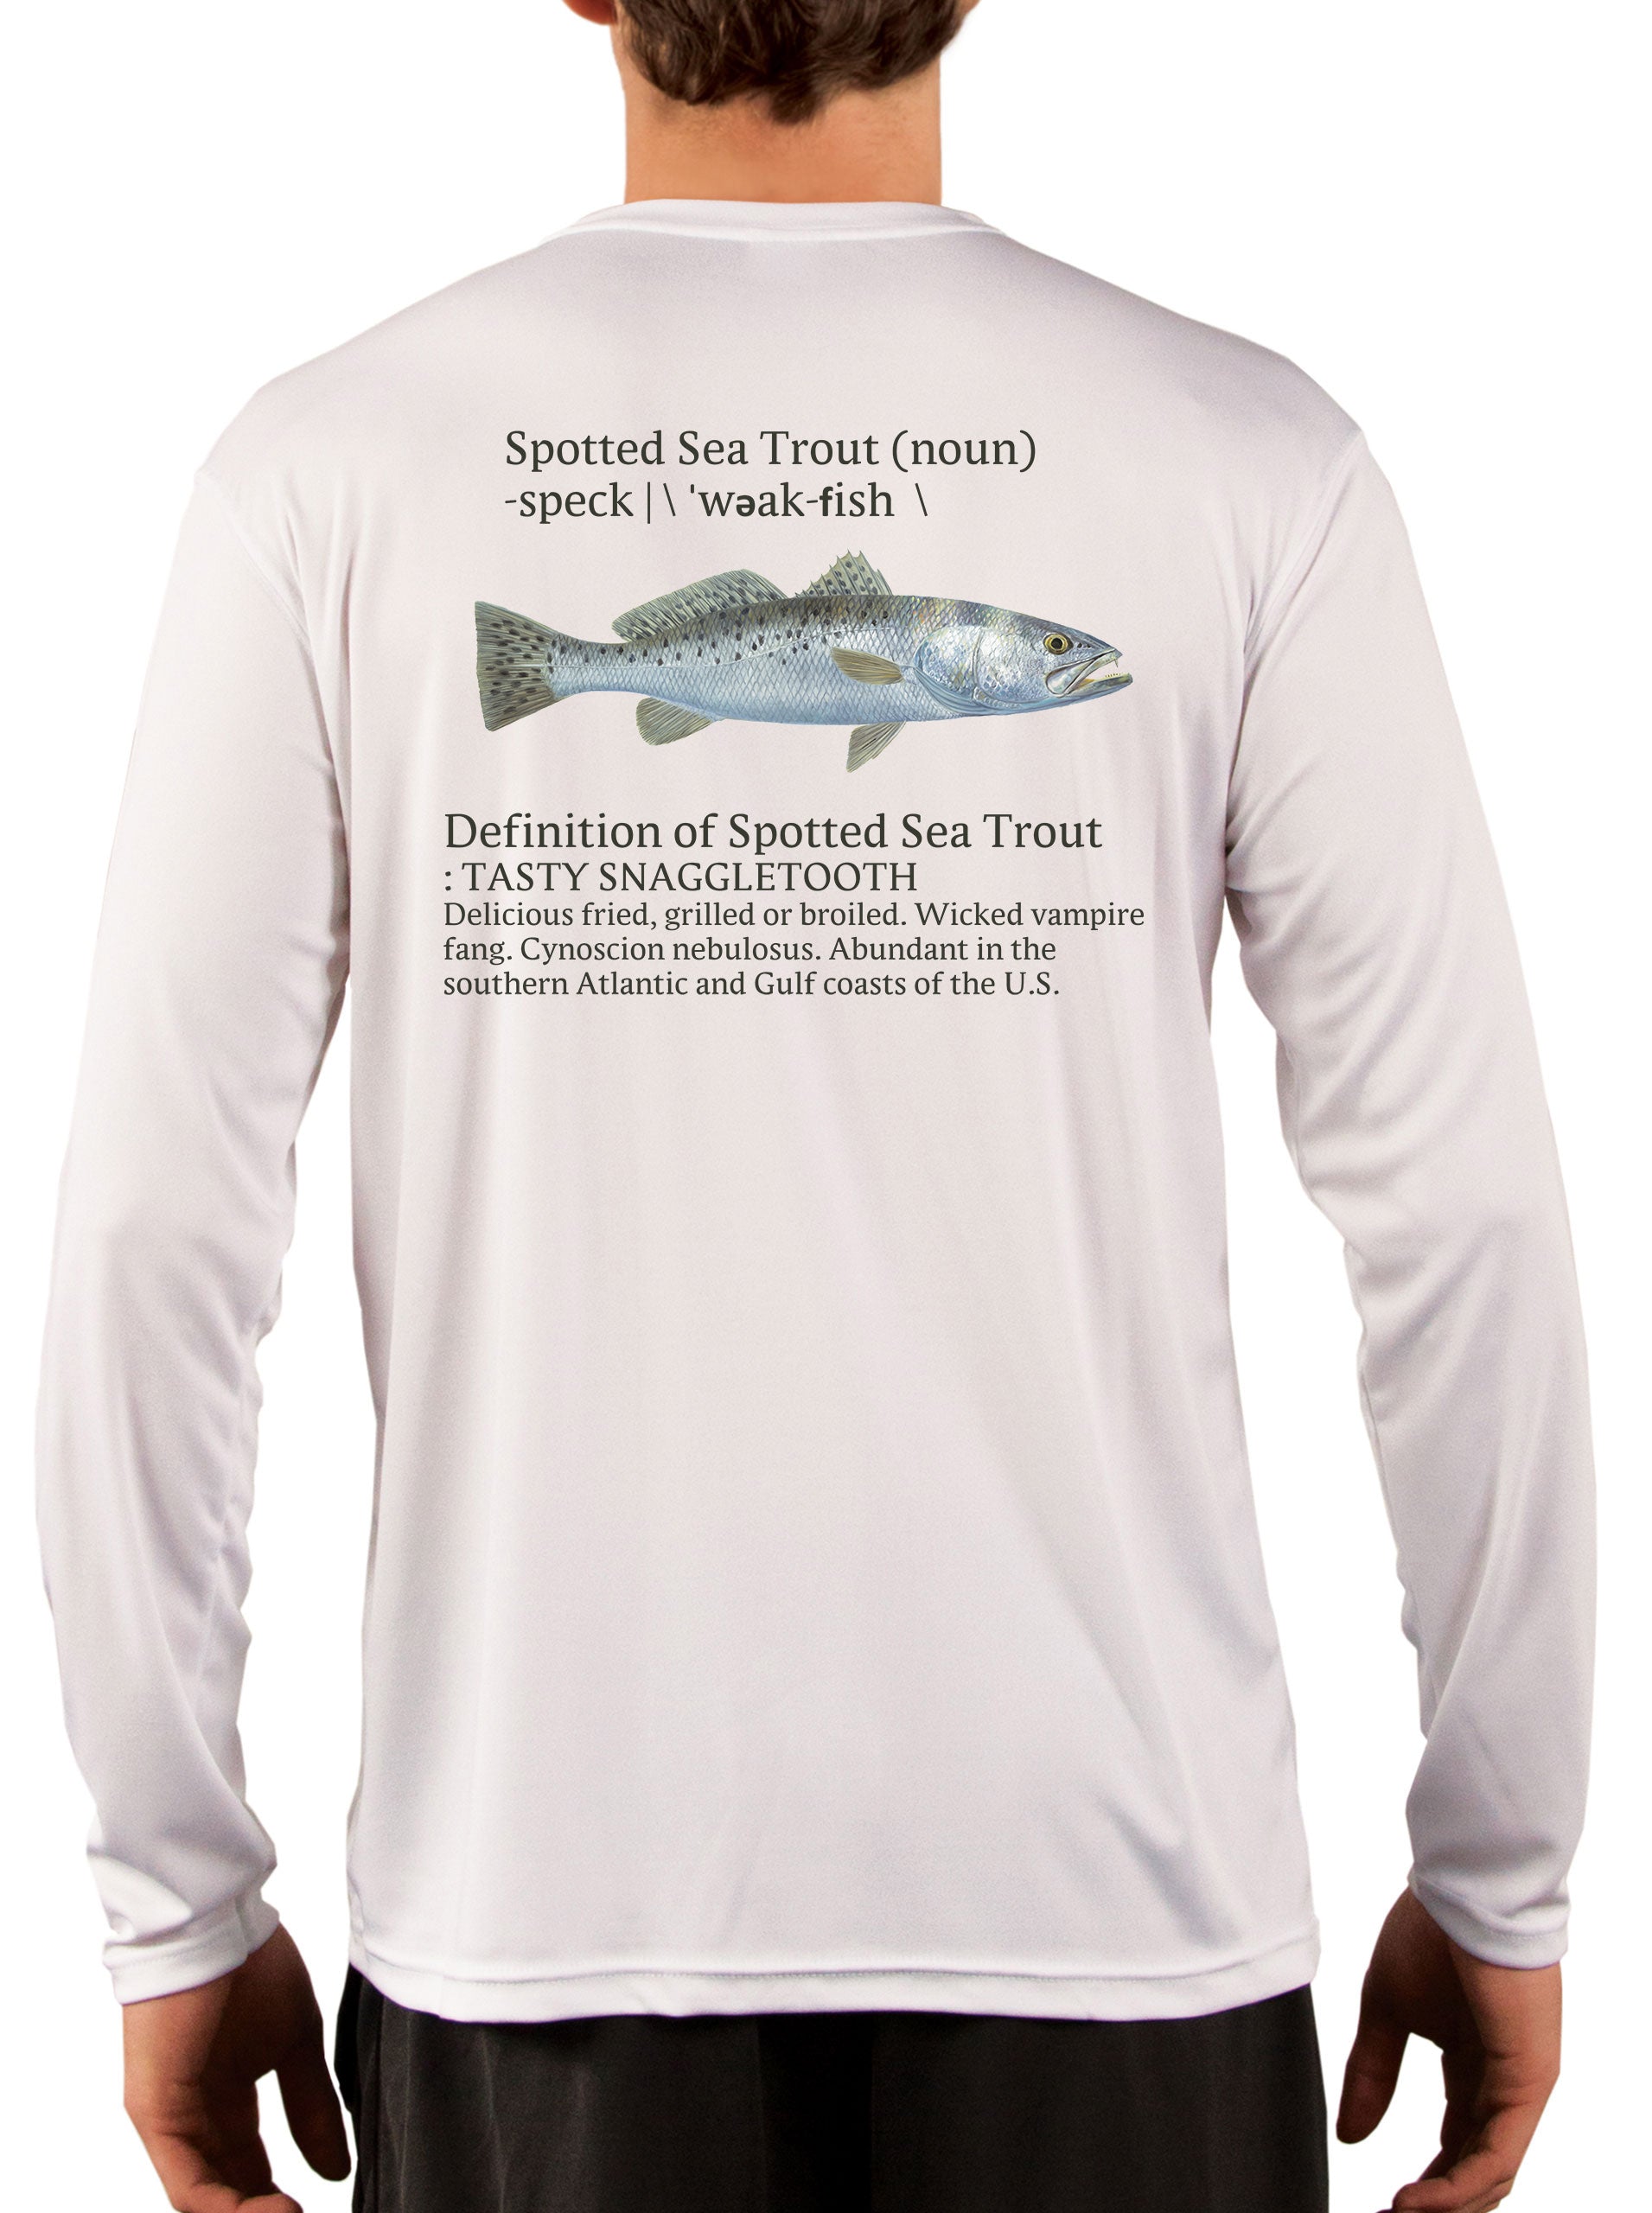 Speckled Trout Fishing Shirts for Men Skiff Inshore - UV Protected +50 Sun Protection with Moisture Wicking Technology 4XL / Yellow